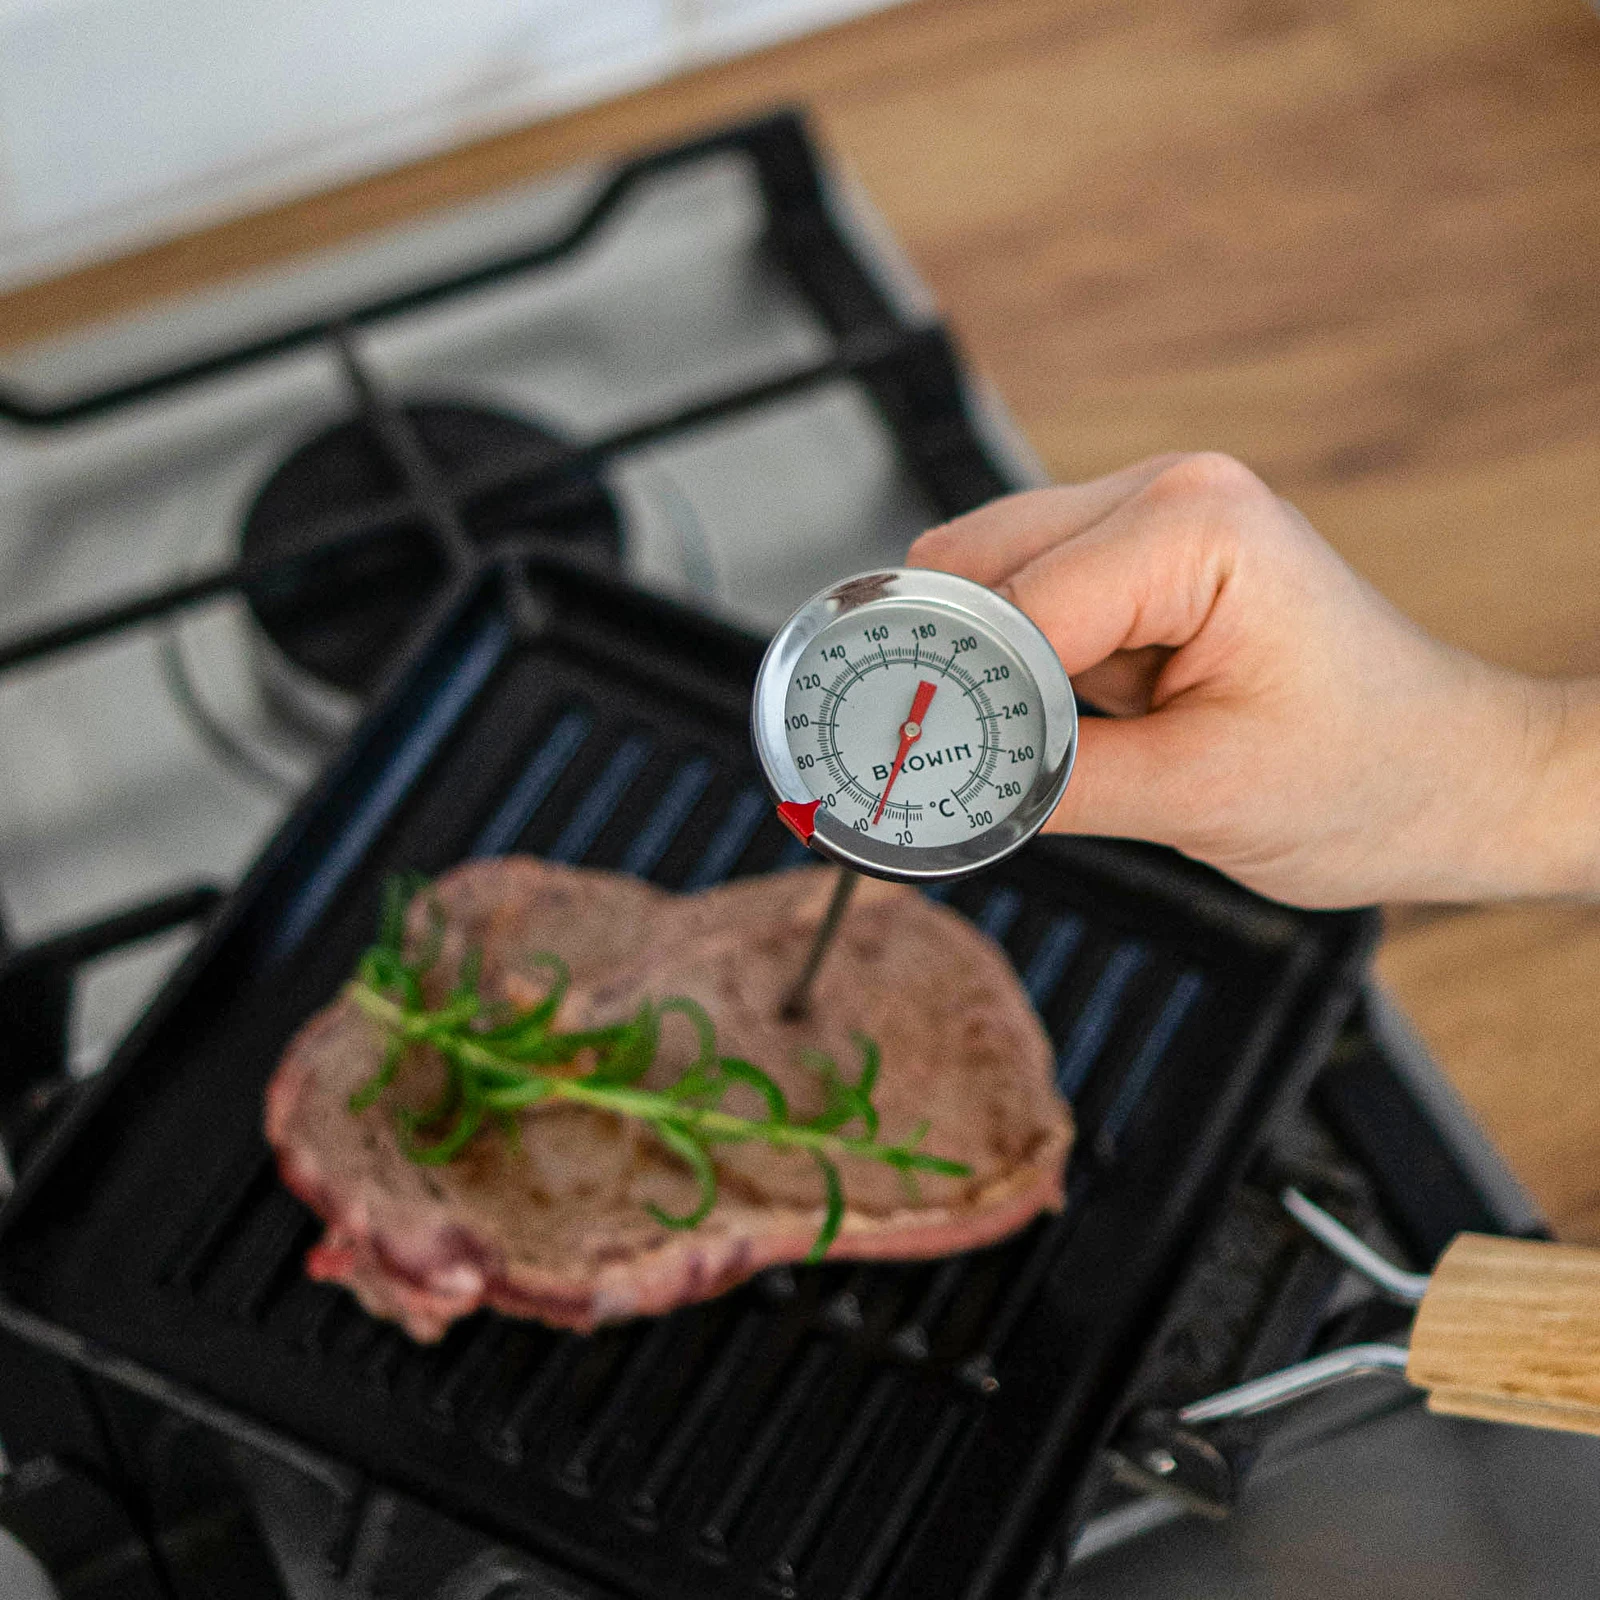 https://browin.com/static/images/1600/roasting-thermometer-10-300-c-101000_4.webp